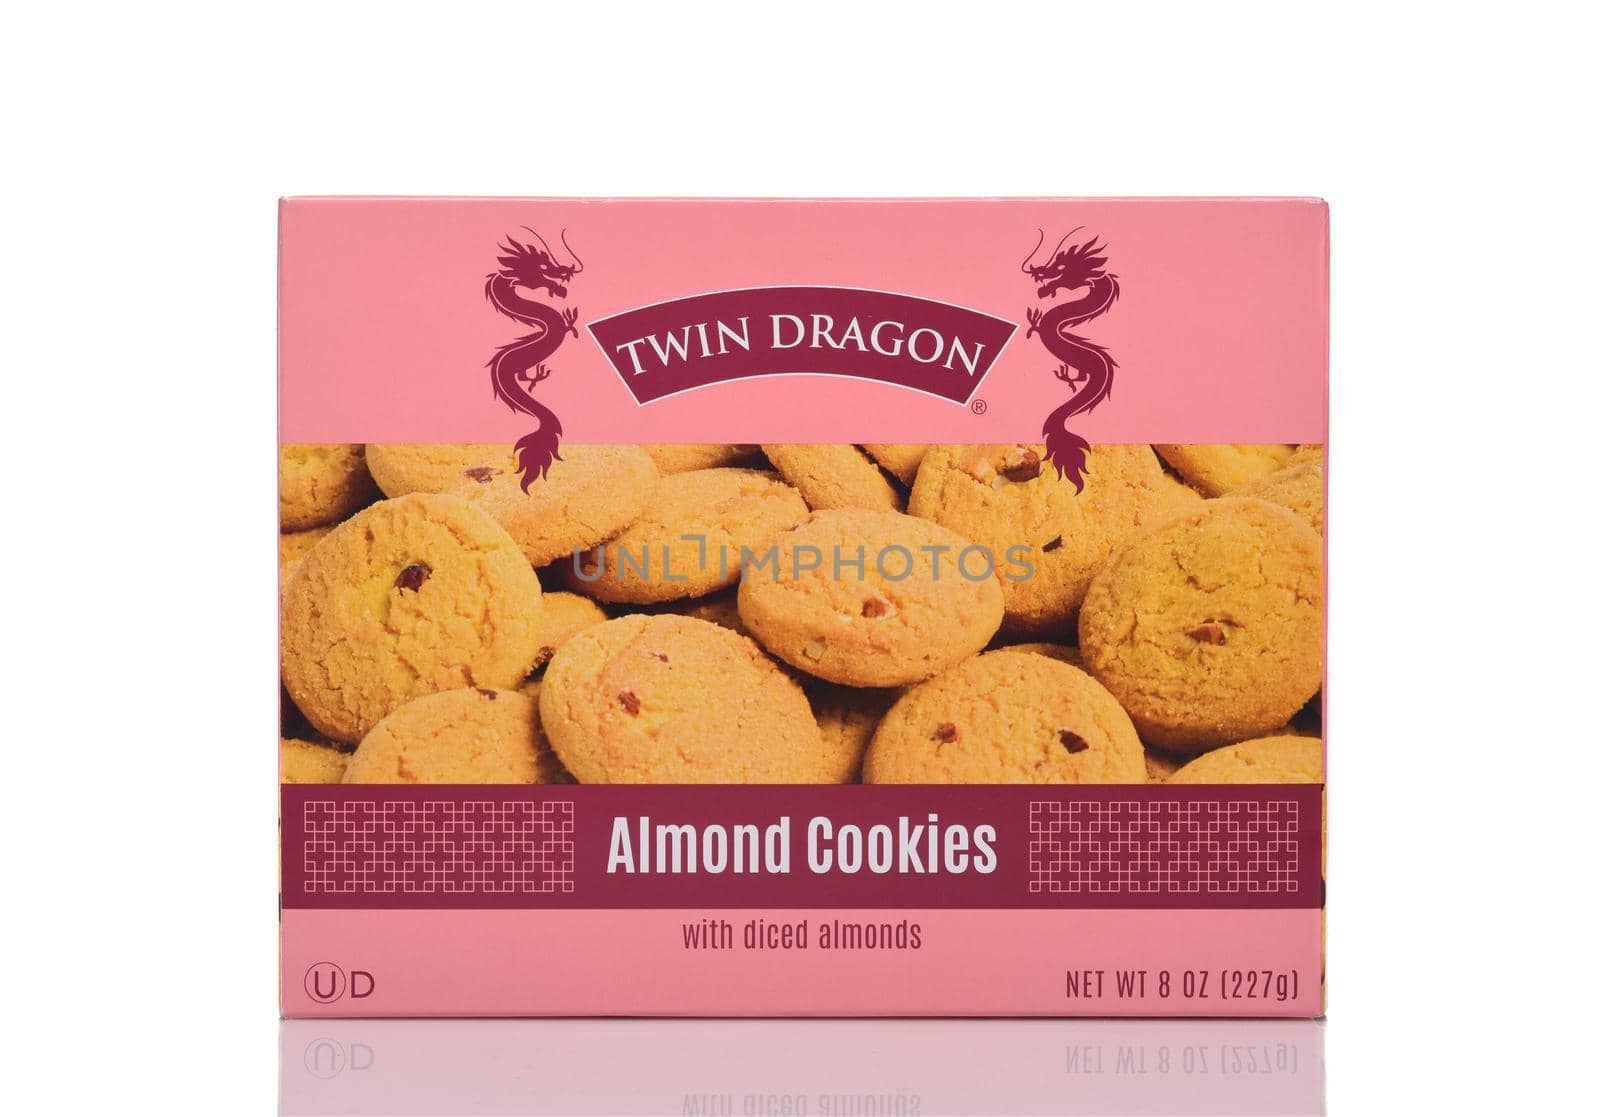 A box of Twin Dragon Almond Cookies by sCukrov